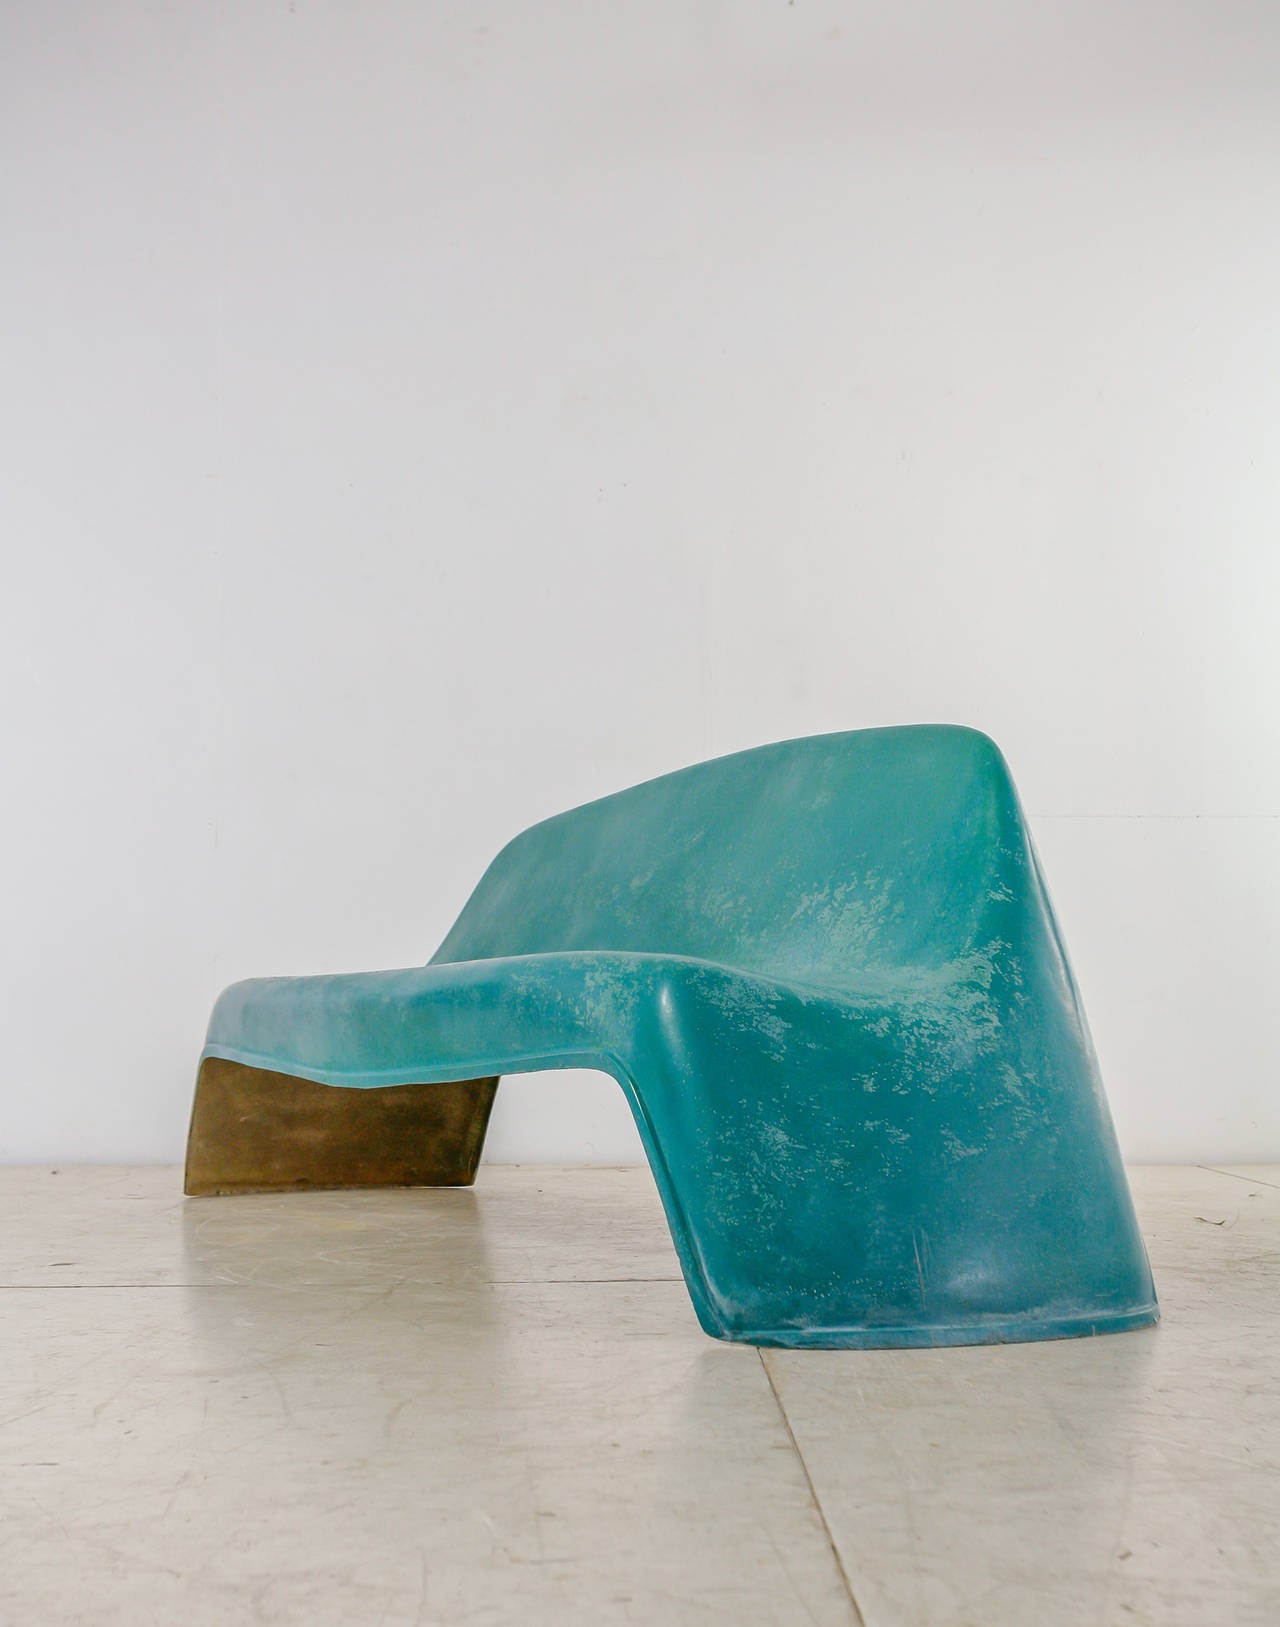 A 1950s fiberglass outdoor bench by Walter Past for Willkahn, Germany.
Walter Papst was one of the first European designers to use fiberglass in furniture. This patented and published bench offers a range of seating positions for people of